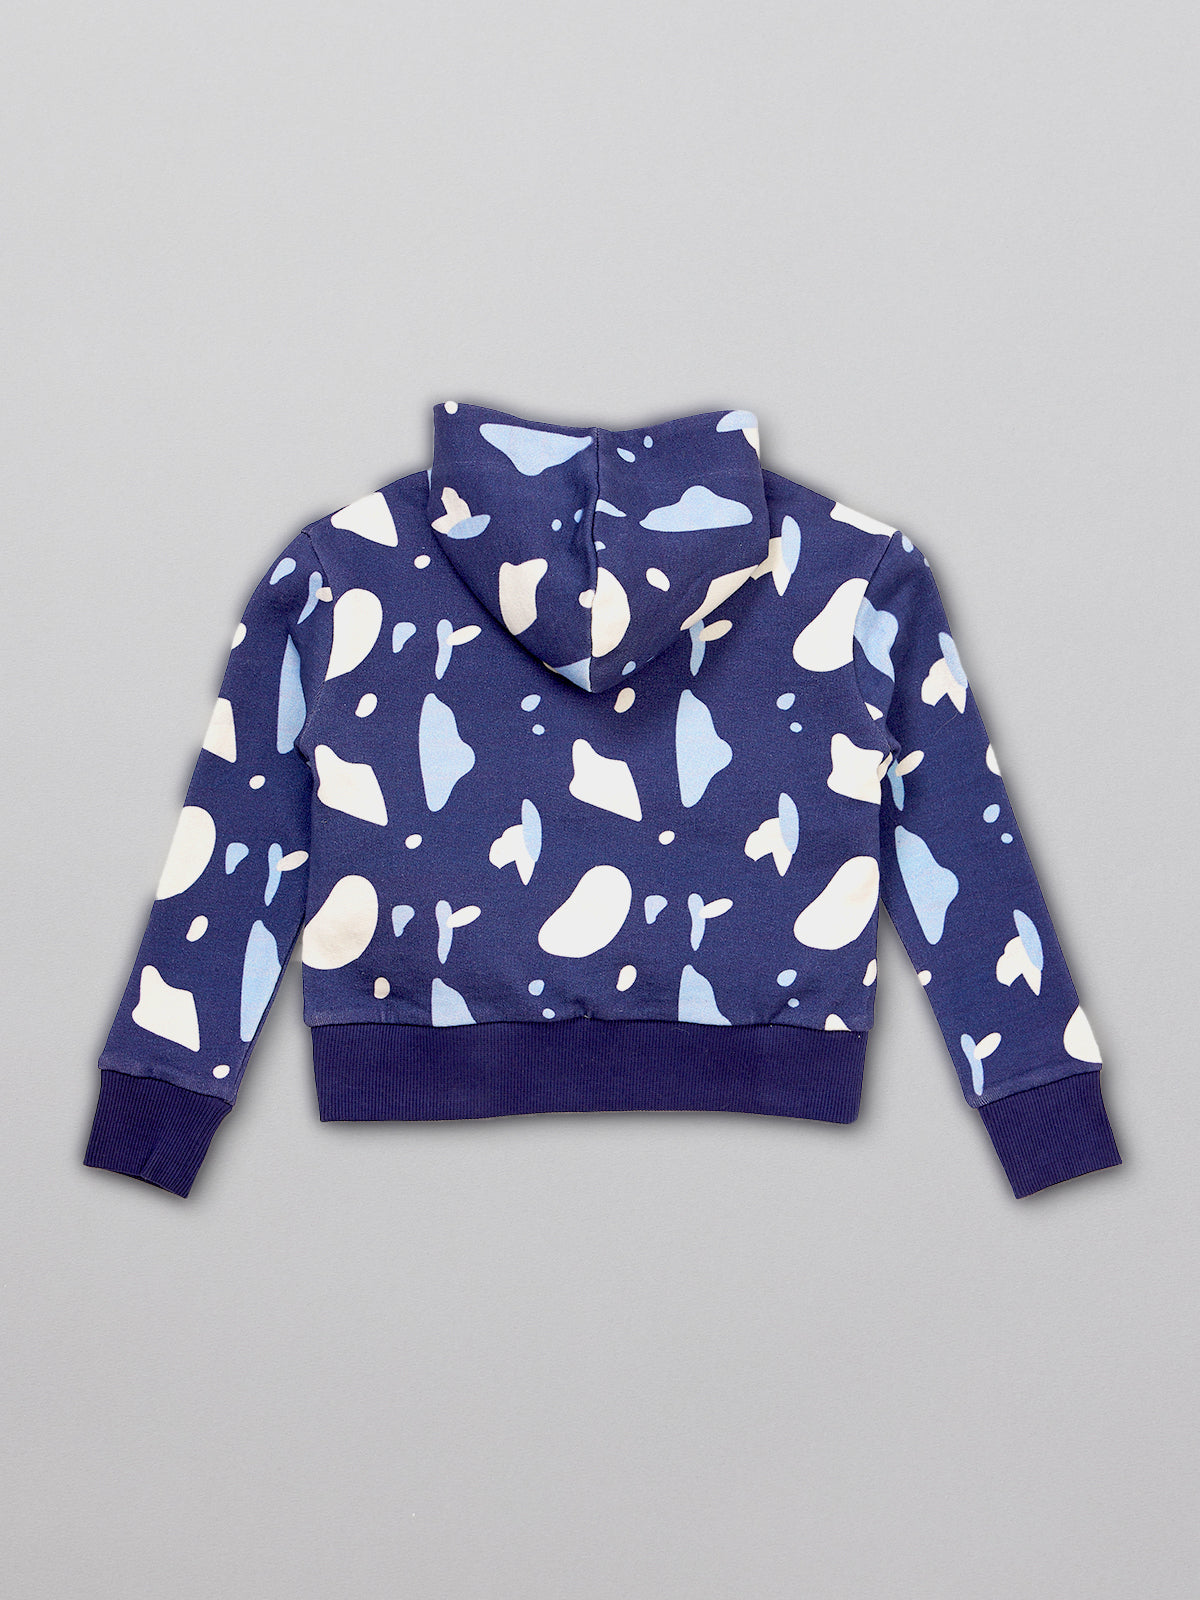 Sustainable kids hoodie in navy with a blue and white terrazzo print, pictured from the back.